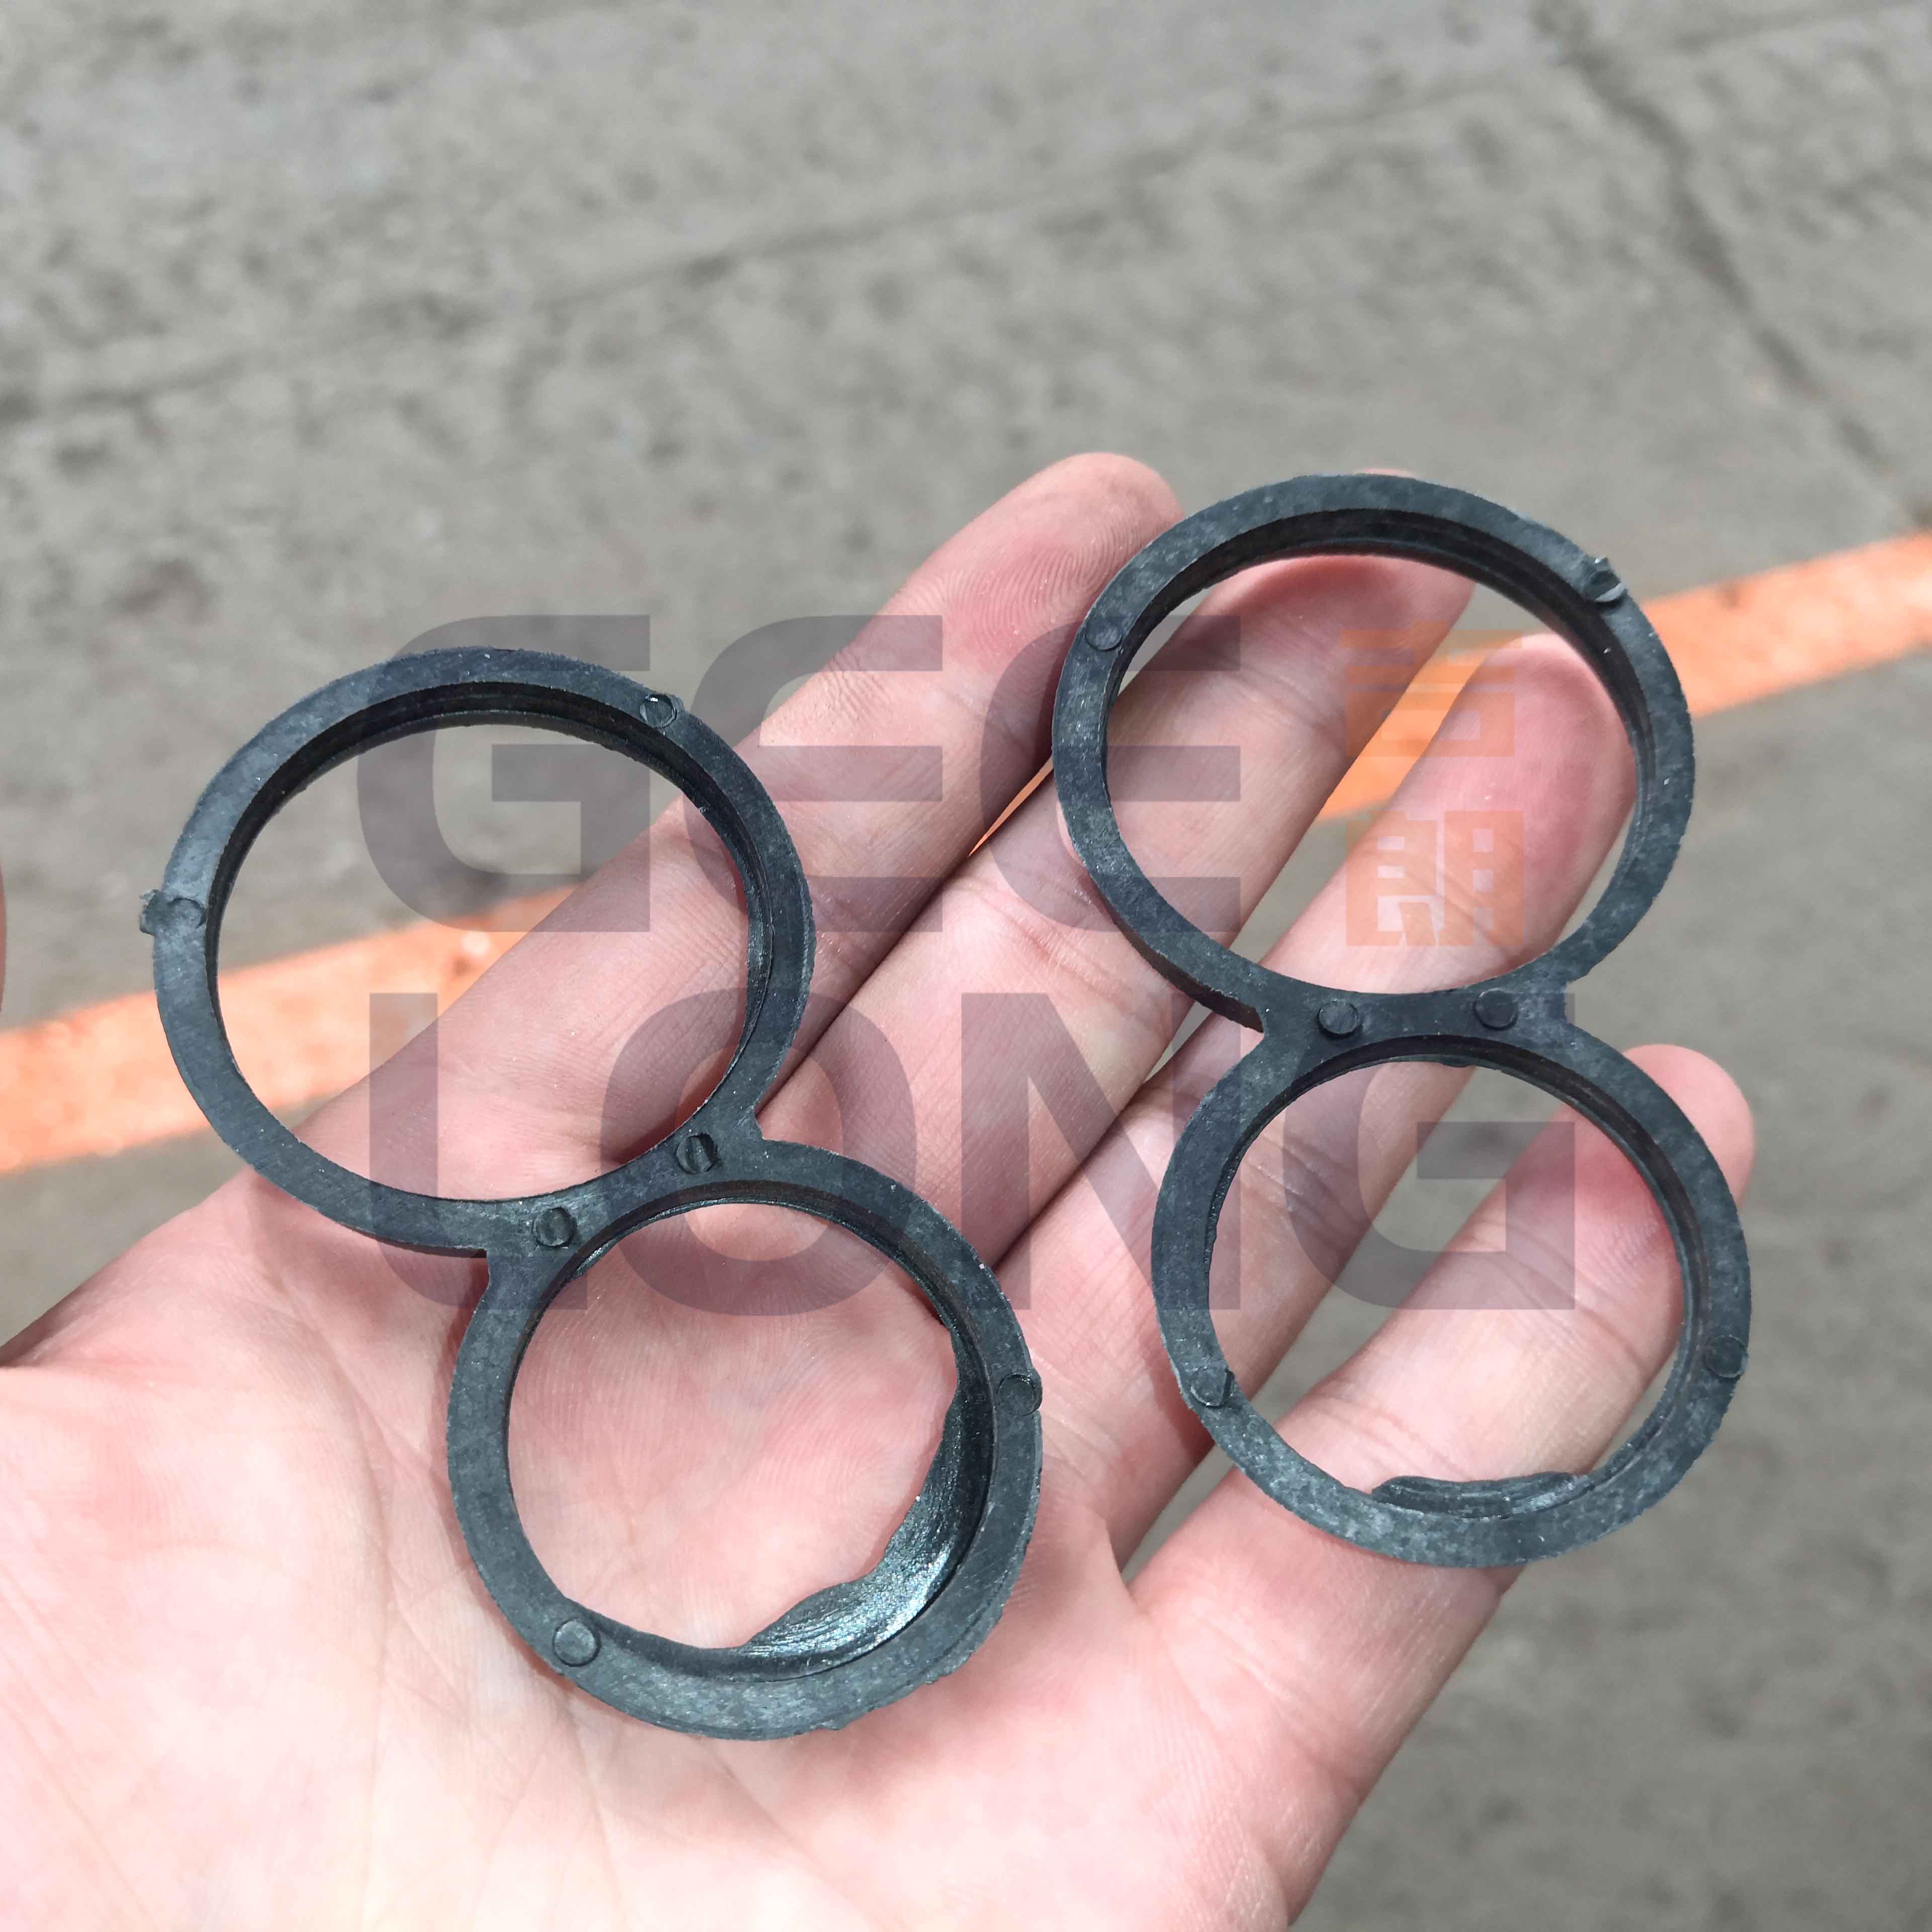 Plastic 8 ring for preventing fancy wood logs cracking